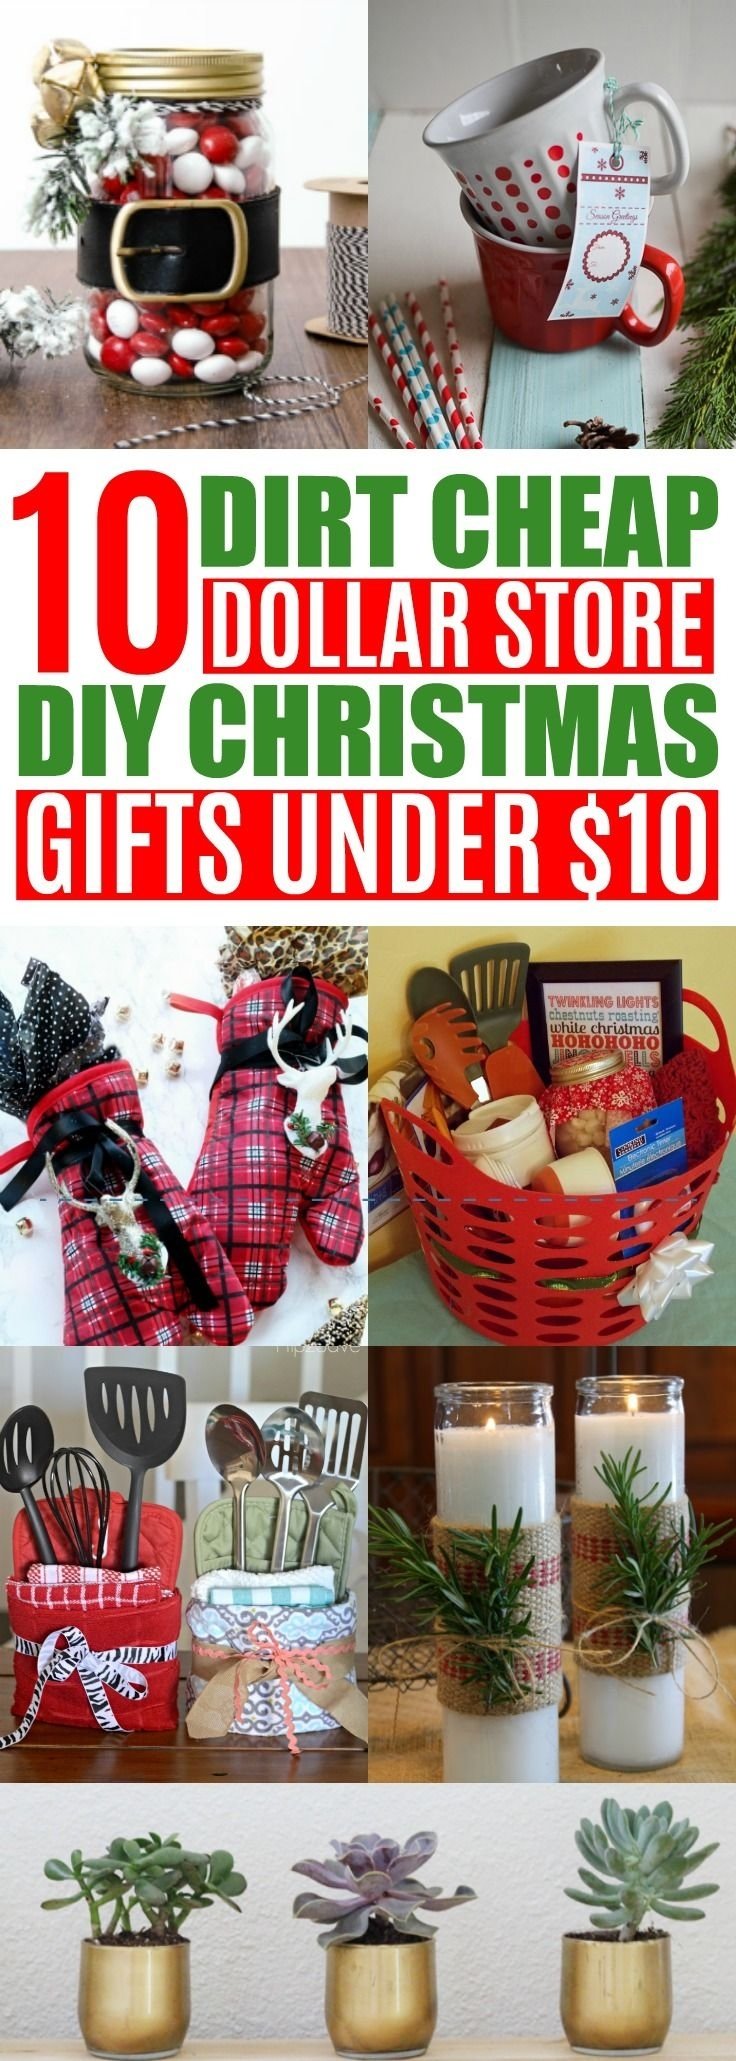 10 Ideal Cheap Gift Ideas For Christmas 10 diy cheap christmas gift ideas from the dollar store under 10 3 2022